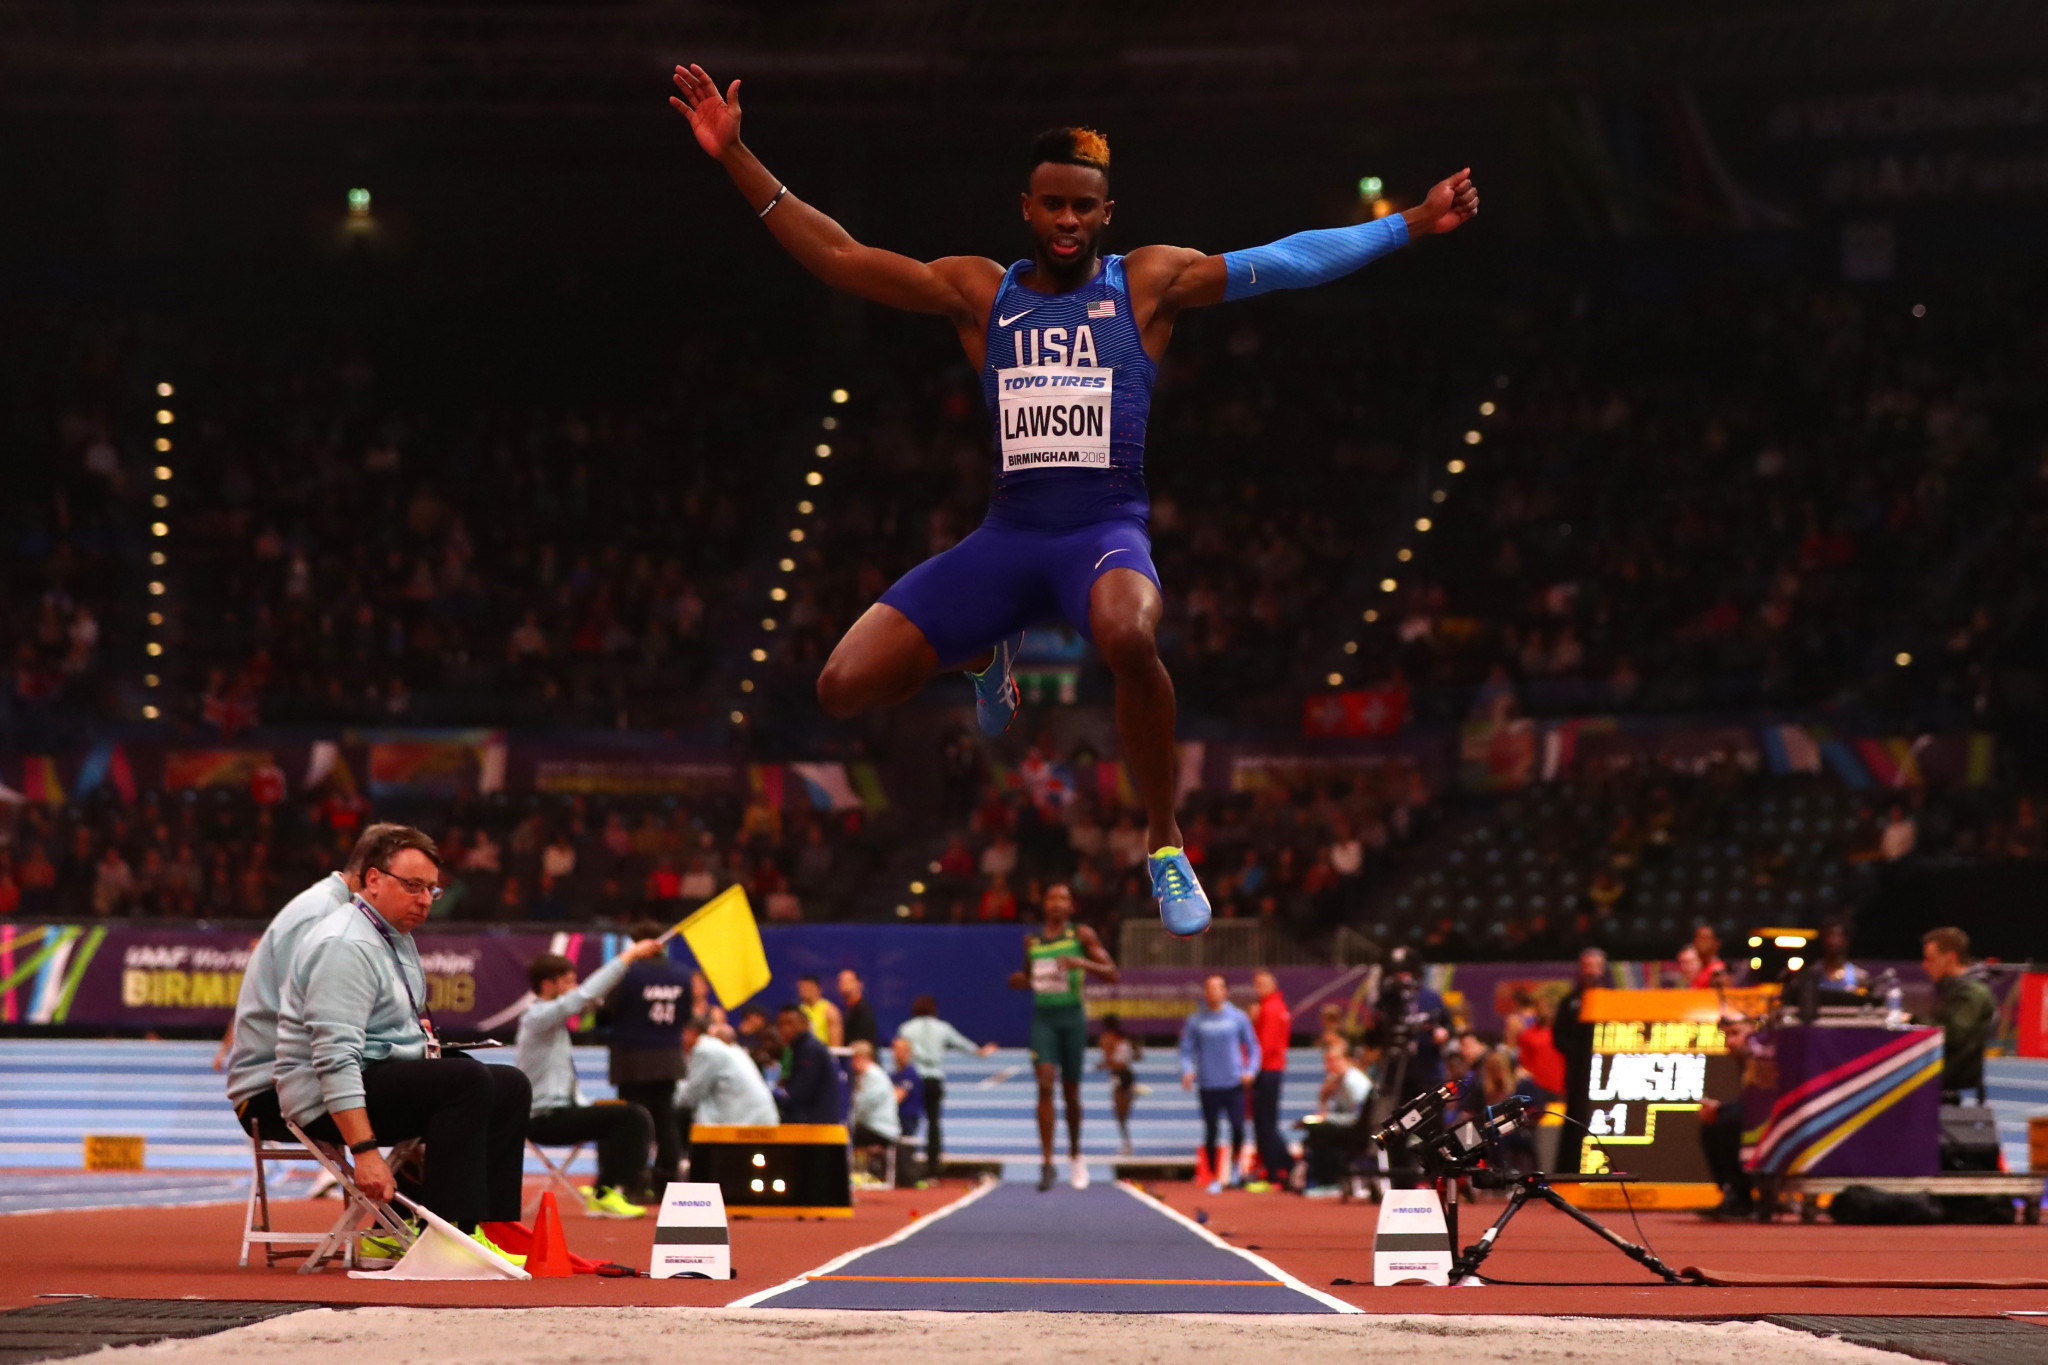 World Championships long jump silver medallist Jarrion Lawson has been banned for four years ©Getty Images